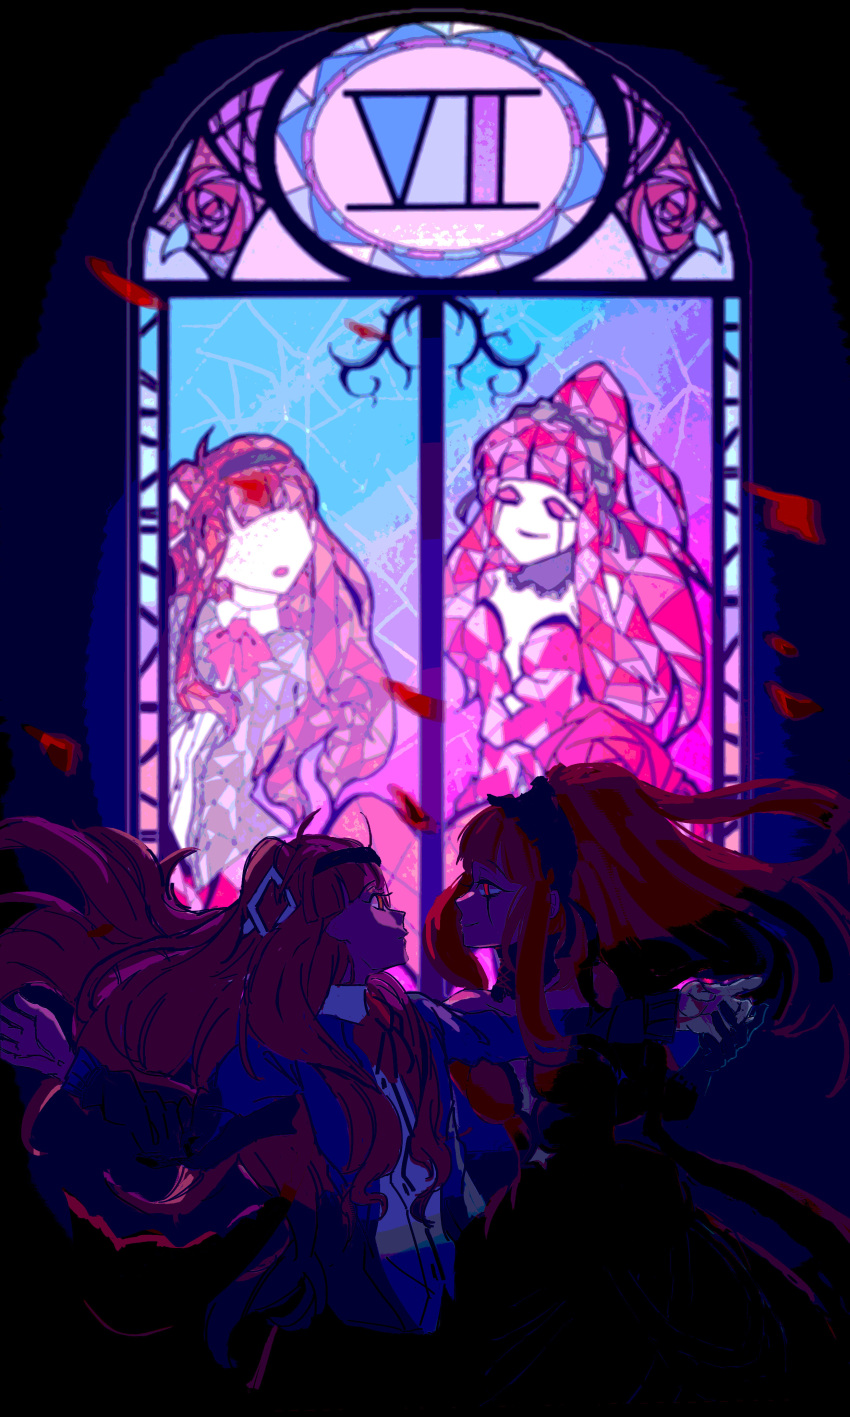 2girls absurdres dress forever_7th_capital highres multiple_girls pink_hair sardine-flavored_potatoes stained_glass vii yuri